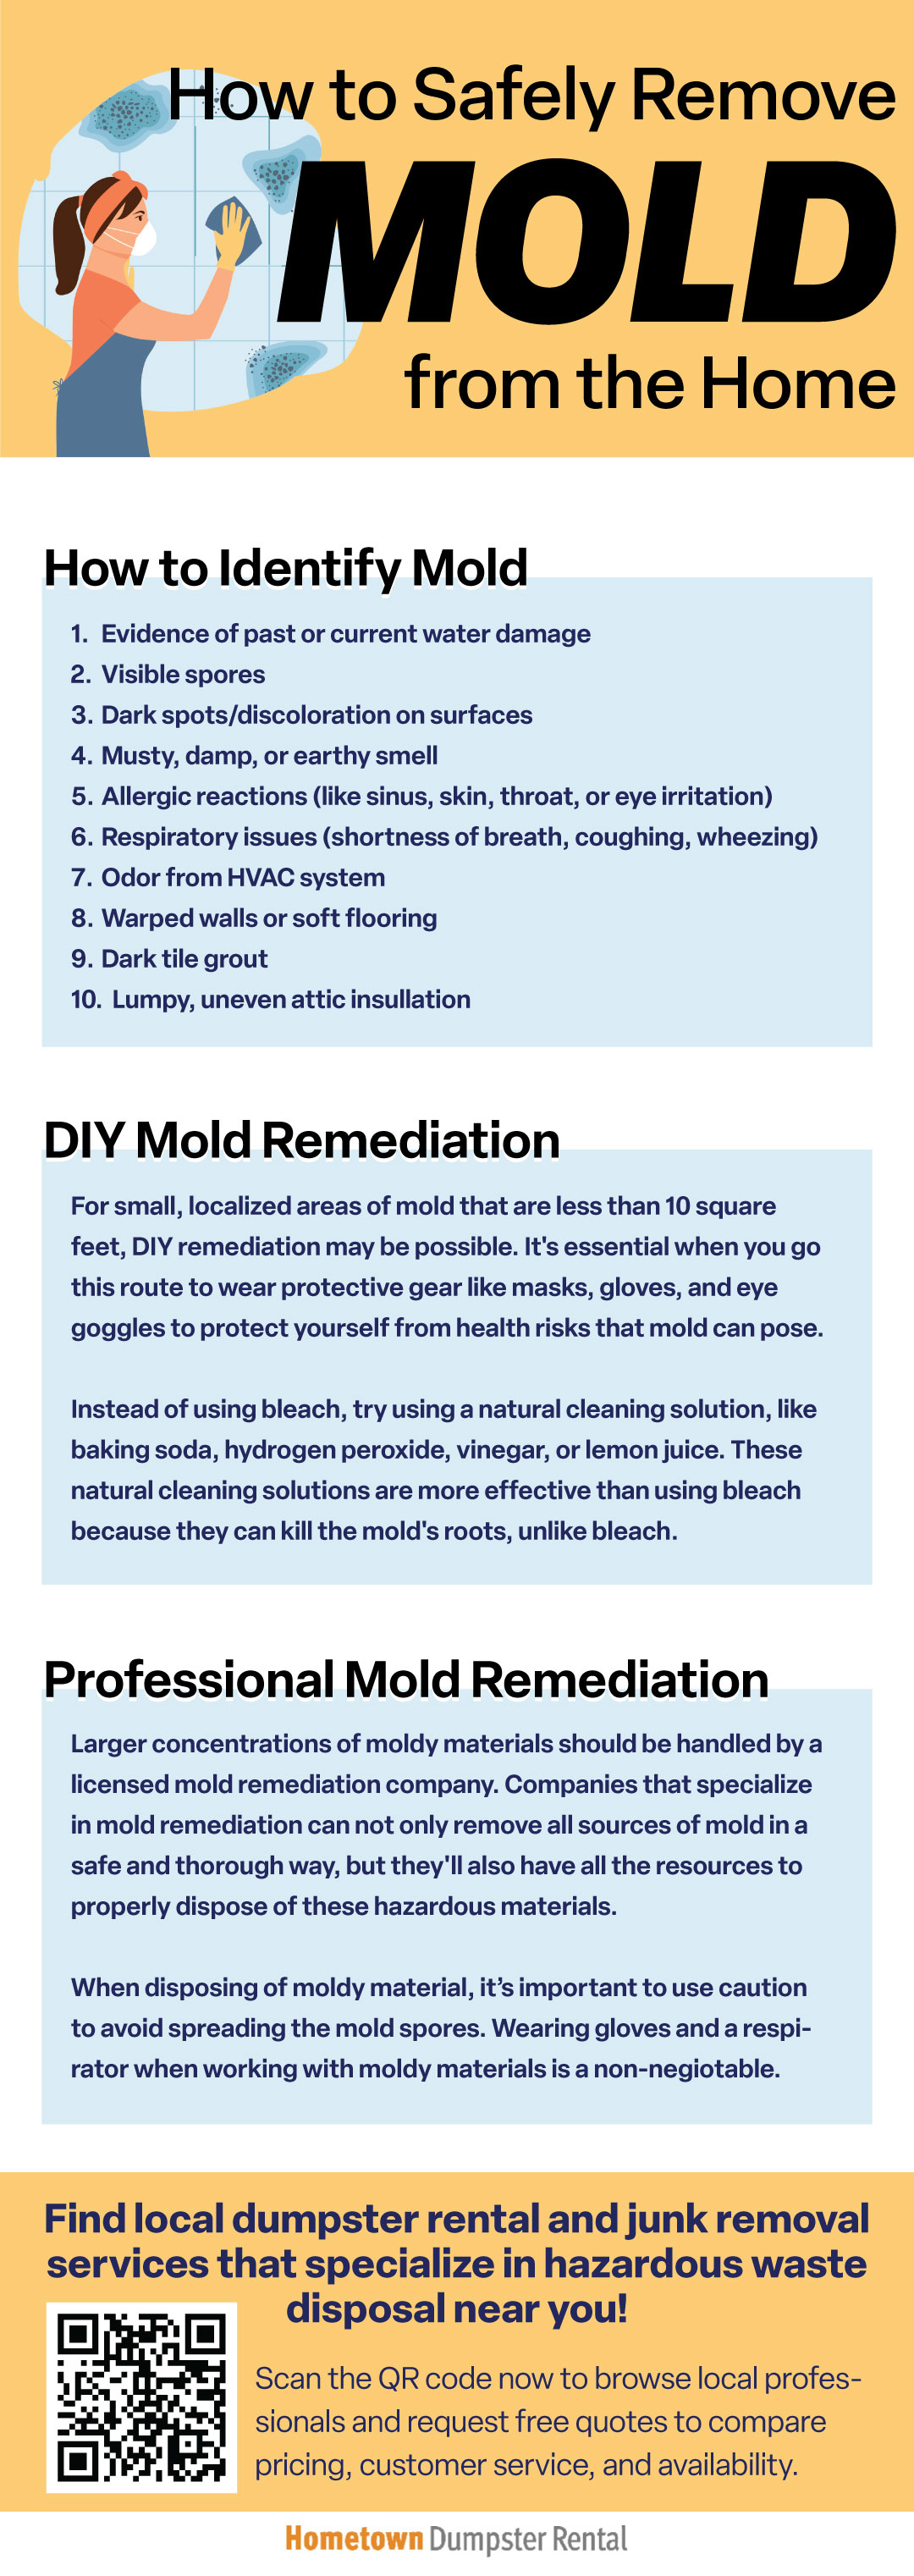 How to Safely Remove Mold from the Home Infographic